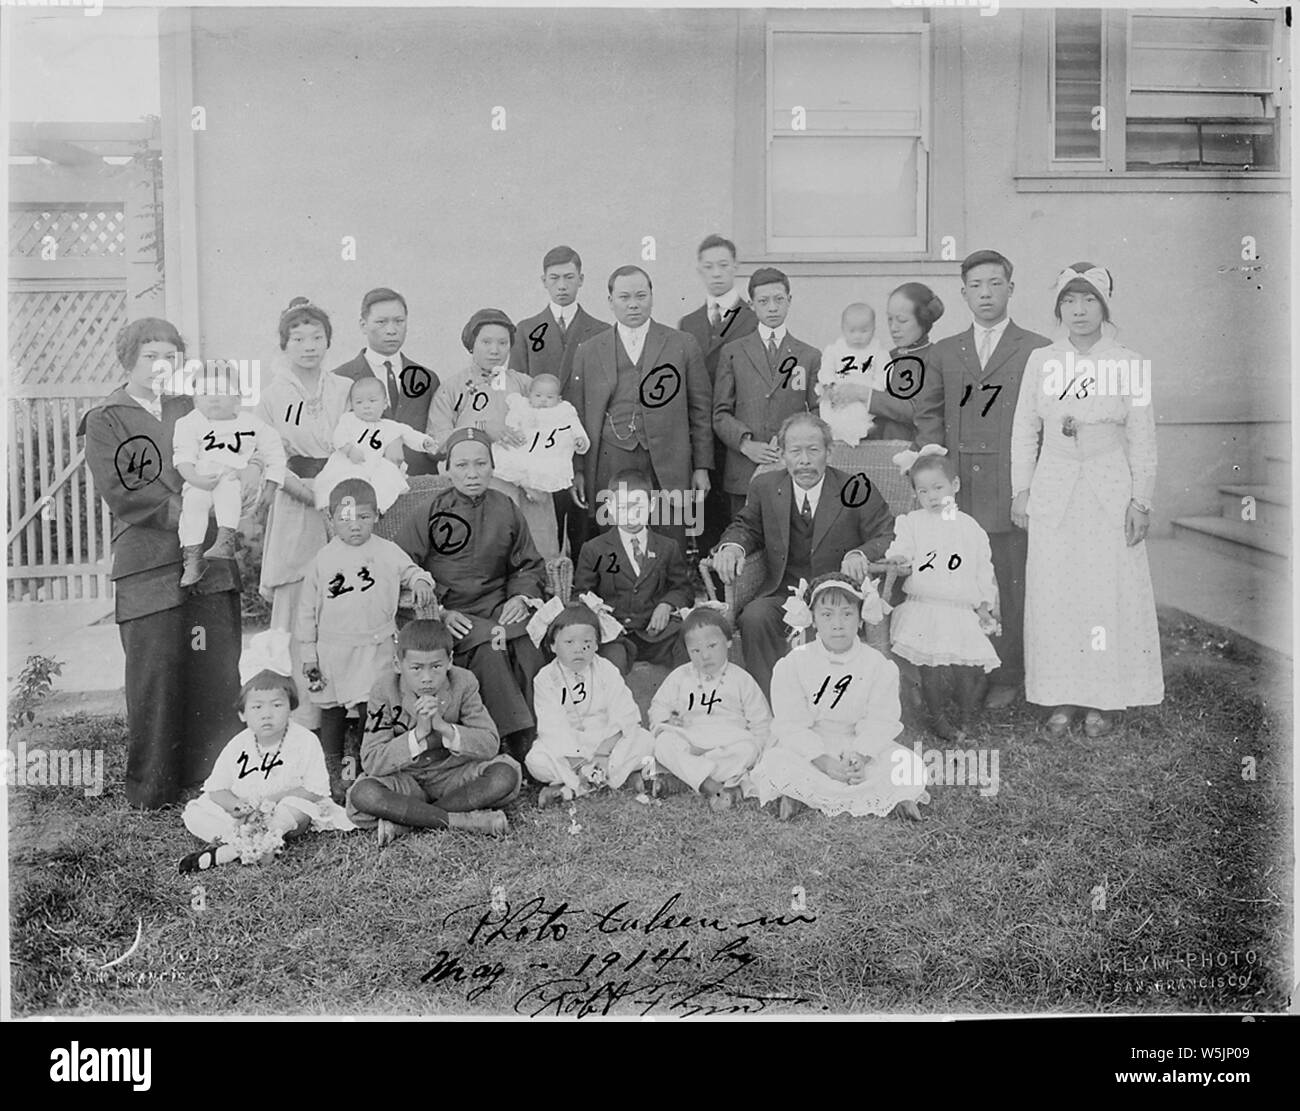 [Multi-Generation Family] Family of Lim Lip Hong alias Lim Tye; Scope and content:  [Multi-Generation Family] Photo taken in May 1914 by Robert F. Lym. [On back of photo:] Family of Lim Lip Hong alias Lim Tye (?hard to read): 1. Lim Lip Hong, father; 2.Chin Shee, mother; 3. Lim Yook, daughter; 4. Lim Young, daughter; 5. Lim Fook Sing (?hard to read), son; 6. Lim Fook Dean (Robt F. Lym), son; 7. Lim Fook Yin (Arthur F. Lym); 8. Lim Fook Wing; 9. Lim Fook Wah; 10. Lee Shee (wife of Lym Fook Sing, #5); 11. Soo Hoo Shee, Ruby Soo Hoo (wife of Robt F. Lym); 12. Lim Lum Quai, son of Lim Sing; 13. Li Stock Photo